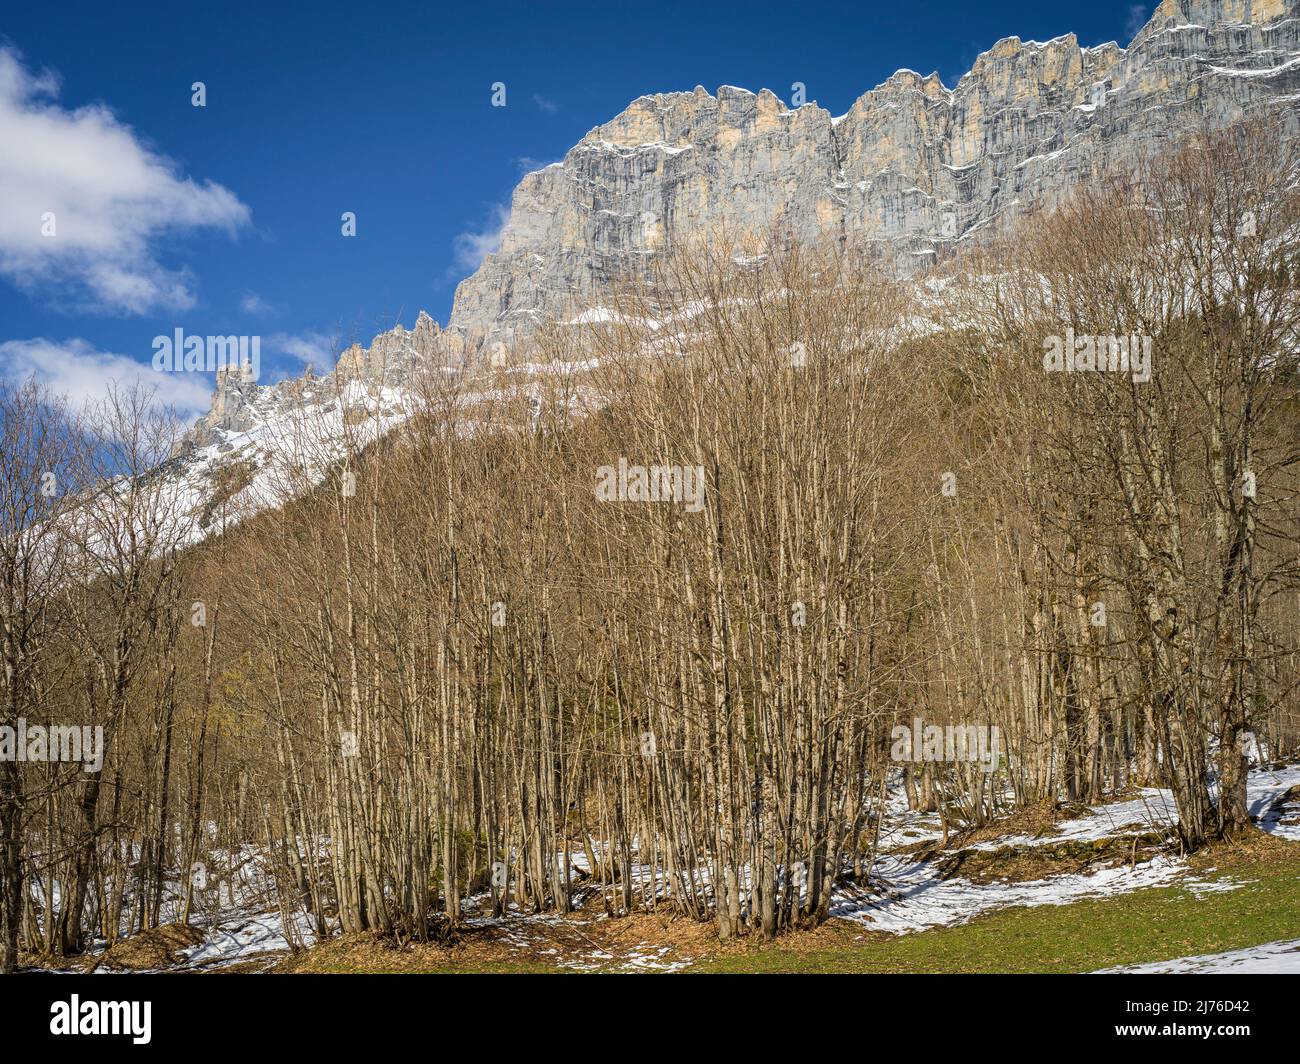 Gadmertal, forest in front of rock pinnacles Stock Photo